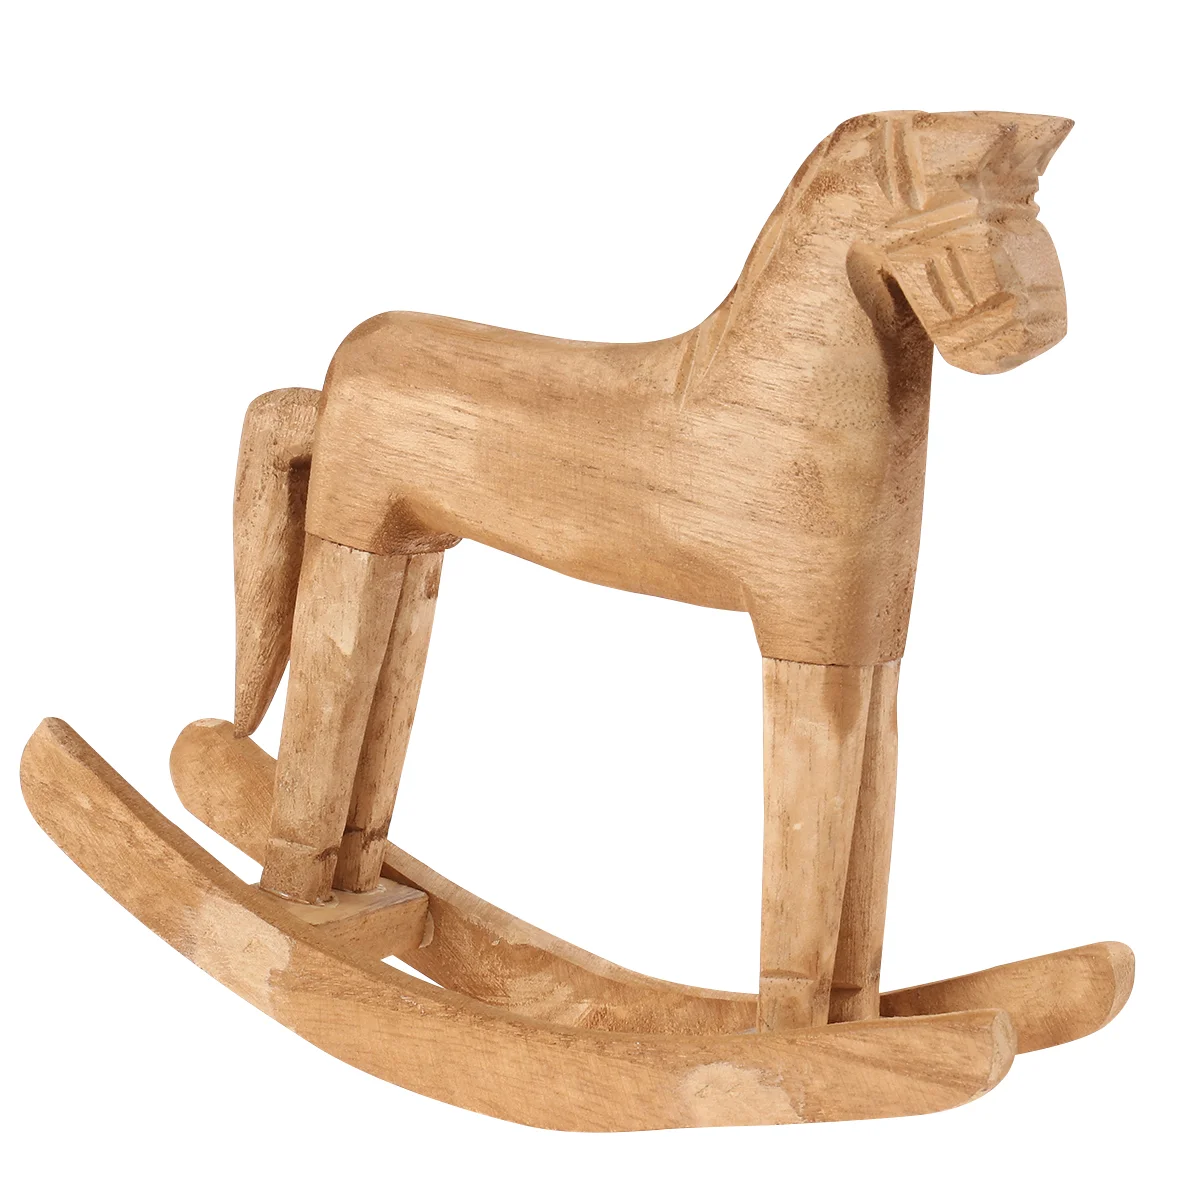 

Ornament Kids Rocking Horse Home Decoration Wooden Animal Figures Ornaments Mini Figurines Toddler